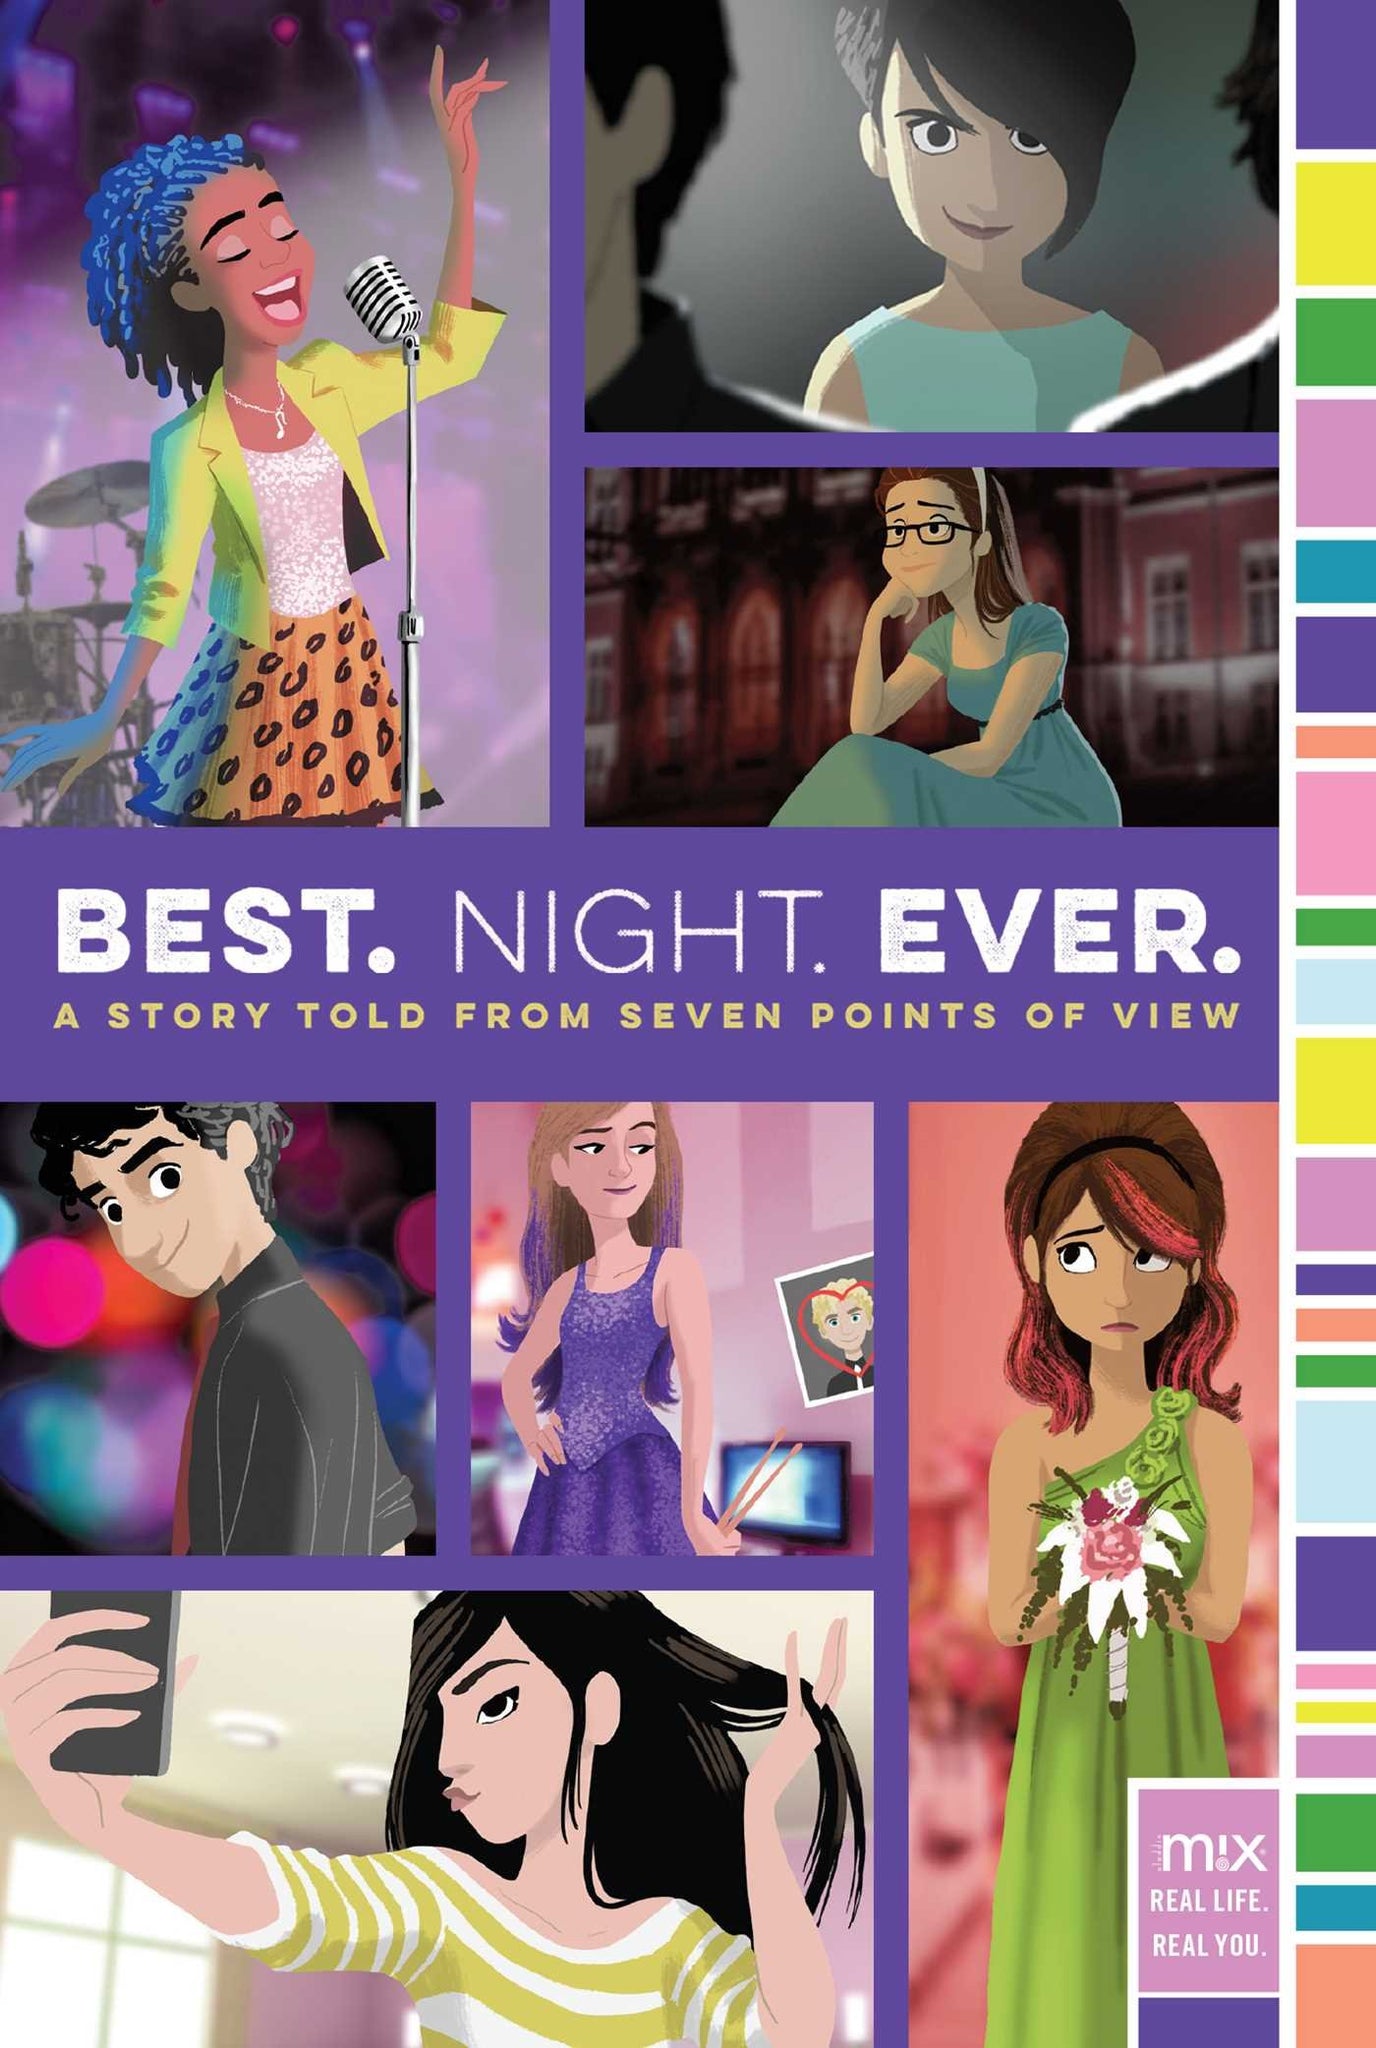 Best. Night. Ever.: A Story Told from Seven Points of View - Paperback